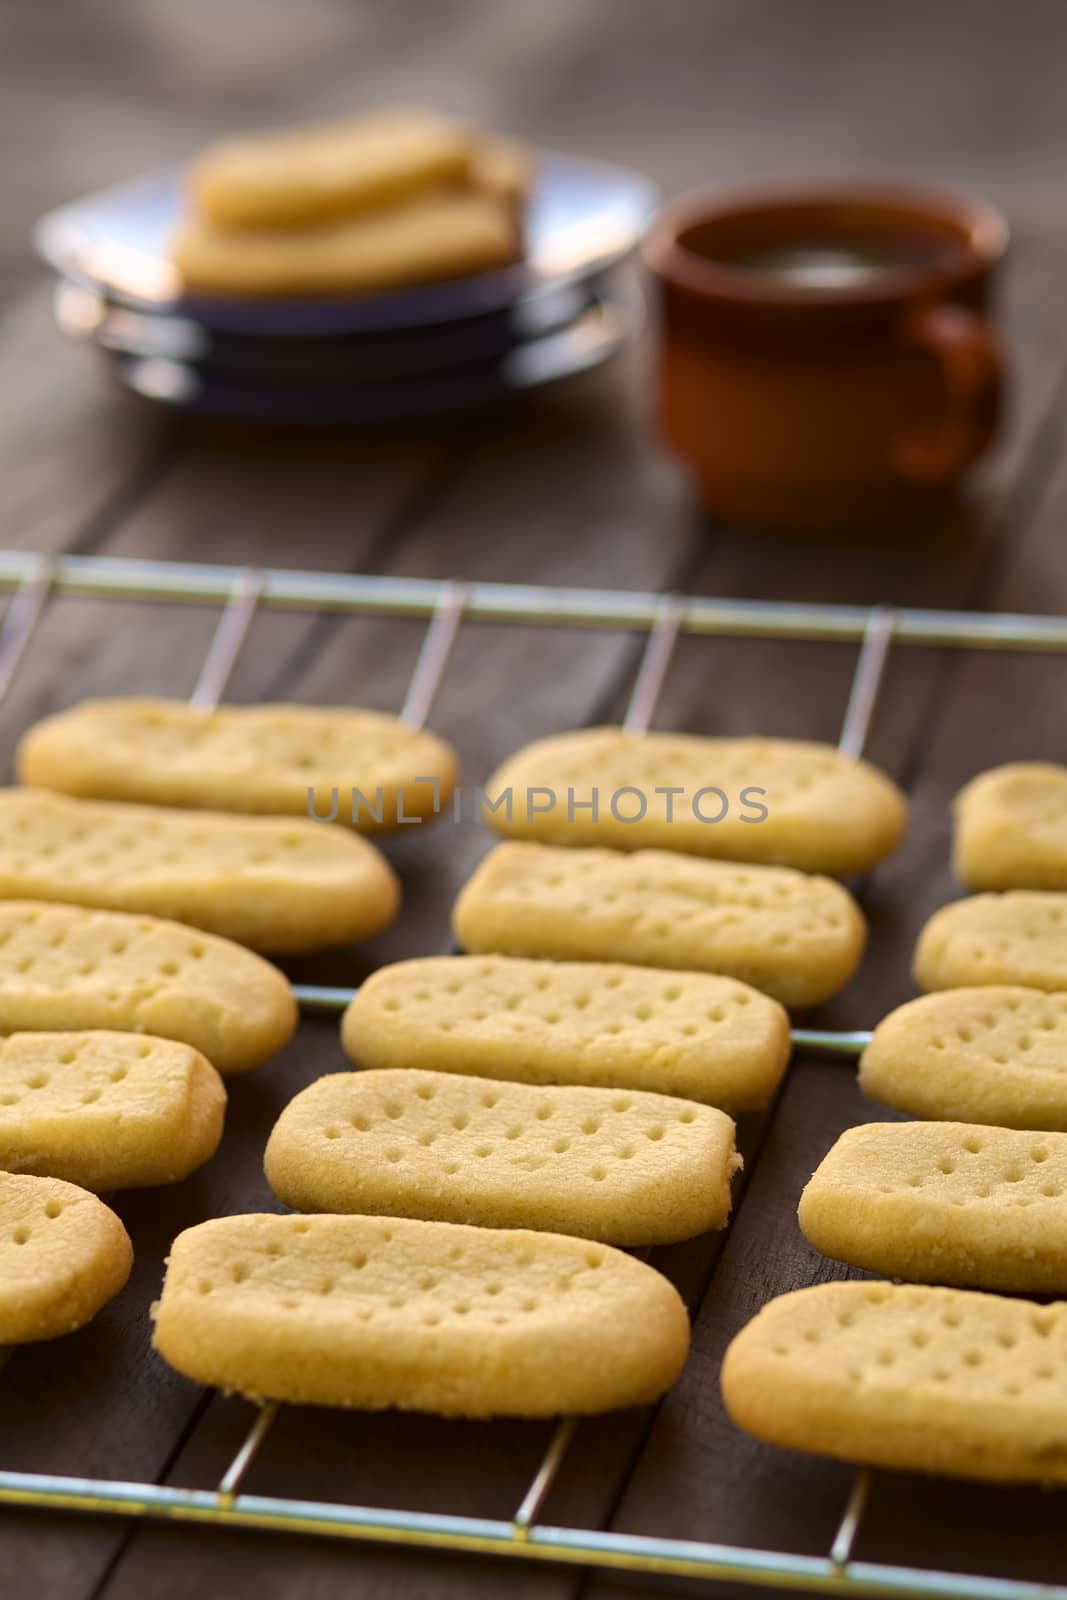 Homebaked shortbread biscuits on cooling rack with plates and cup of tea in the back (Selective Focus, Focus on the front of the second cookie in the middle column)